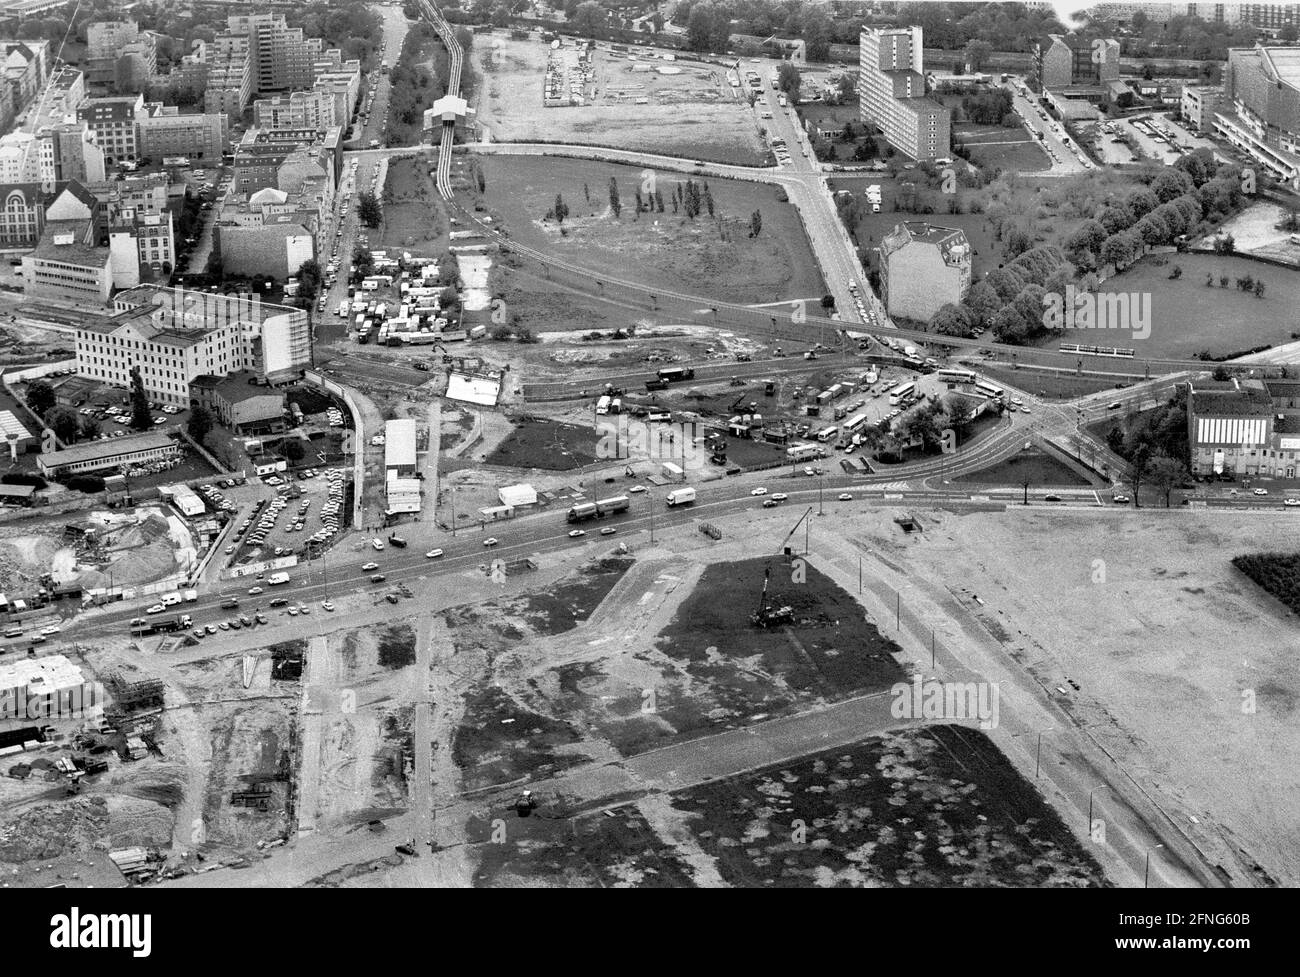 Berlin-City / Construction Sites / 1991 Potsdamer Platz. Above the Landwehrkanal. In the middle the Weinhaus Huth, the only old building of today's business district. On the elaende is still a test track of the AEG magnet train. Left above Kreuzberg, the Leipziger Strasse runs in the middle. On the right is the ruin of the Hotel Esplanade. On the areas below are today the representations of the states. // Aerial views / Kreuzberg / Districts / Mitte / Cityscape [automated translation] Stock Photo